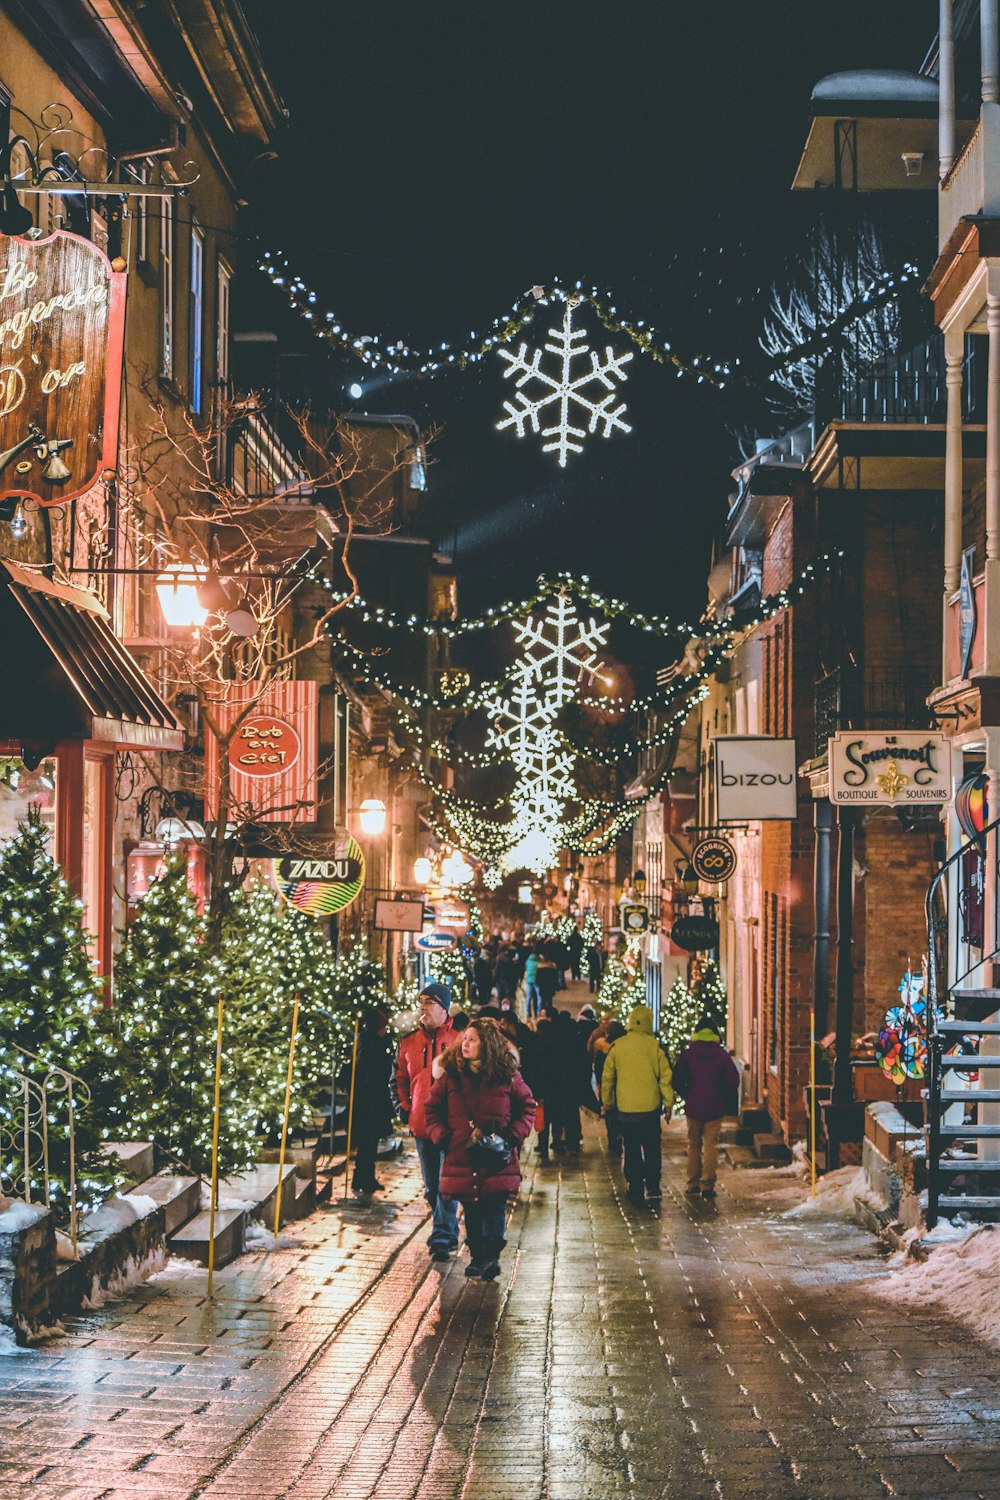 people walking on street near Christmas trees during night time